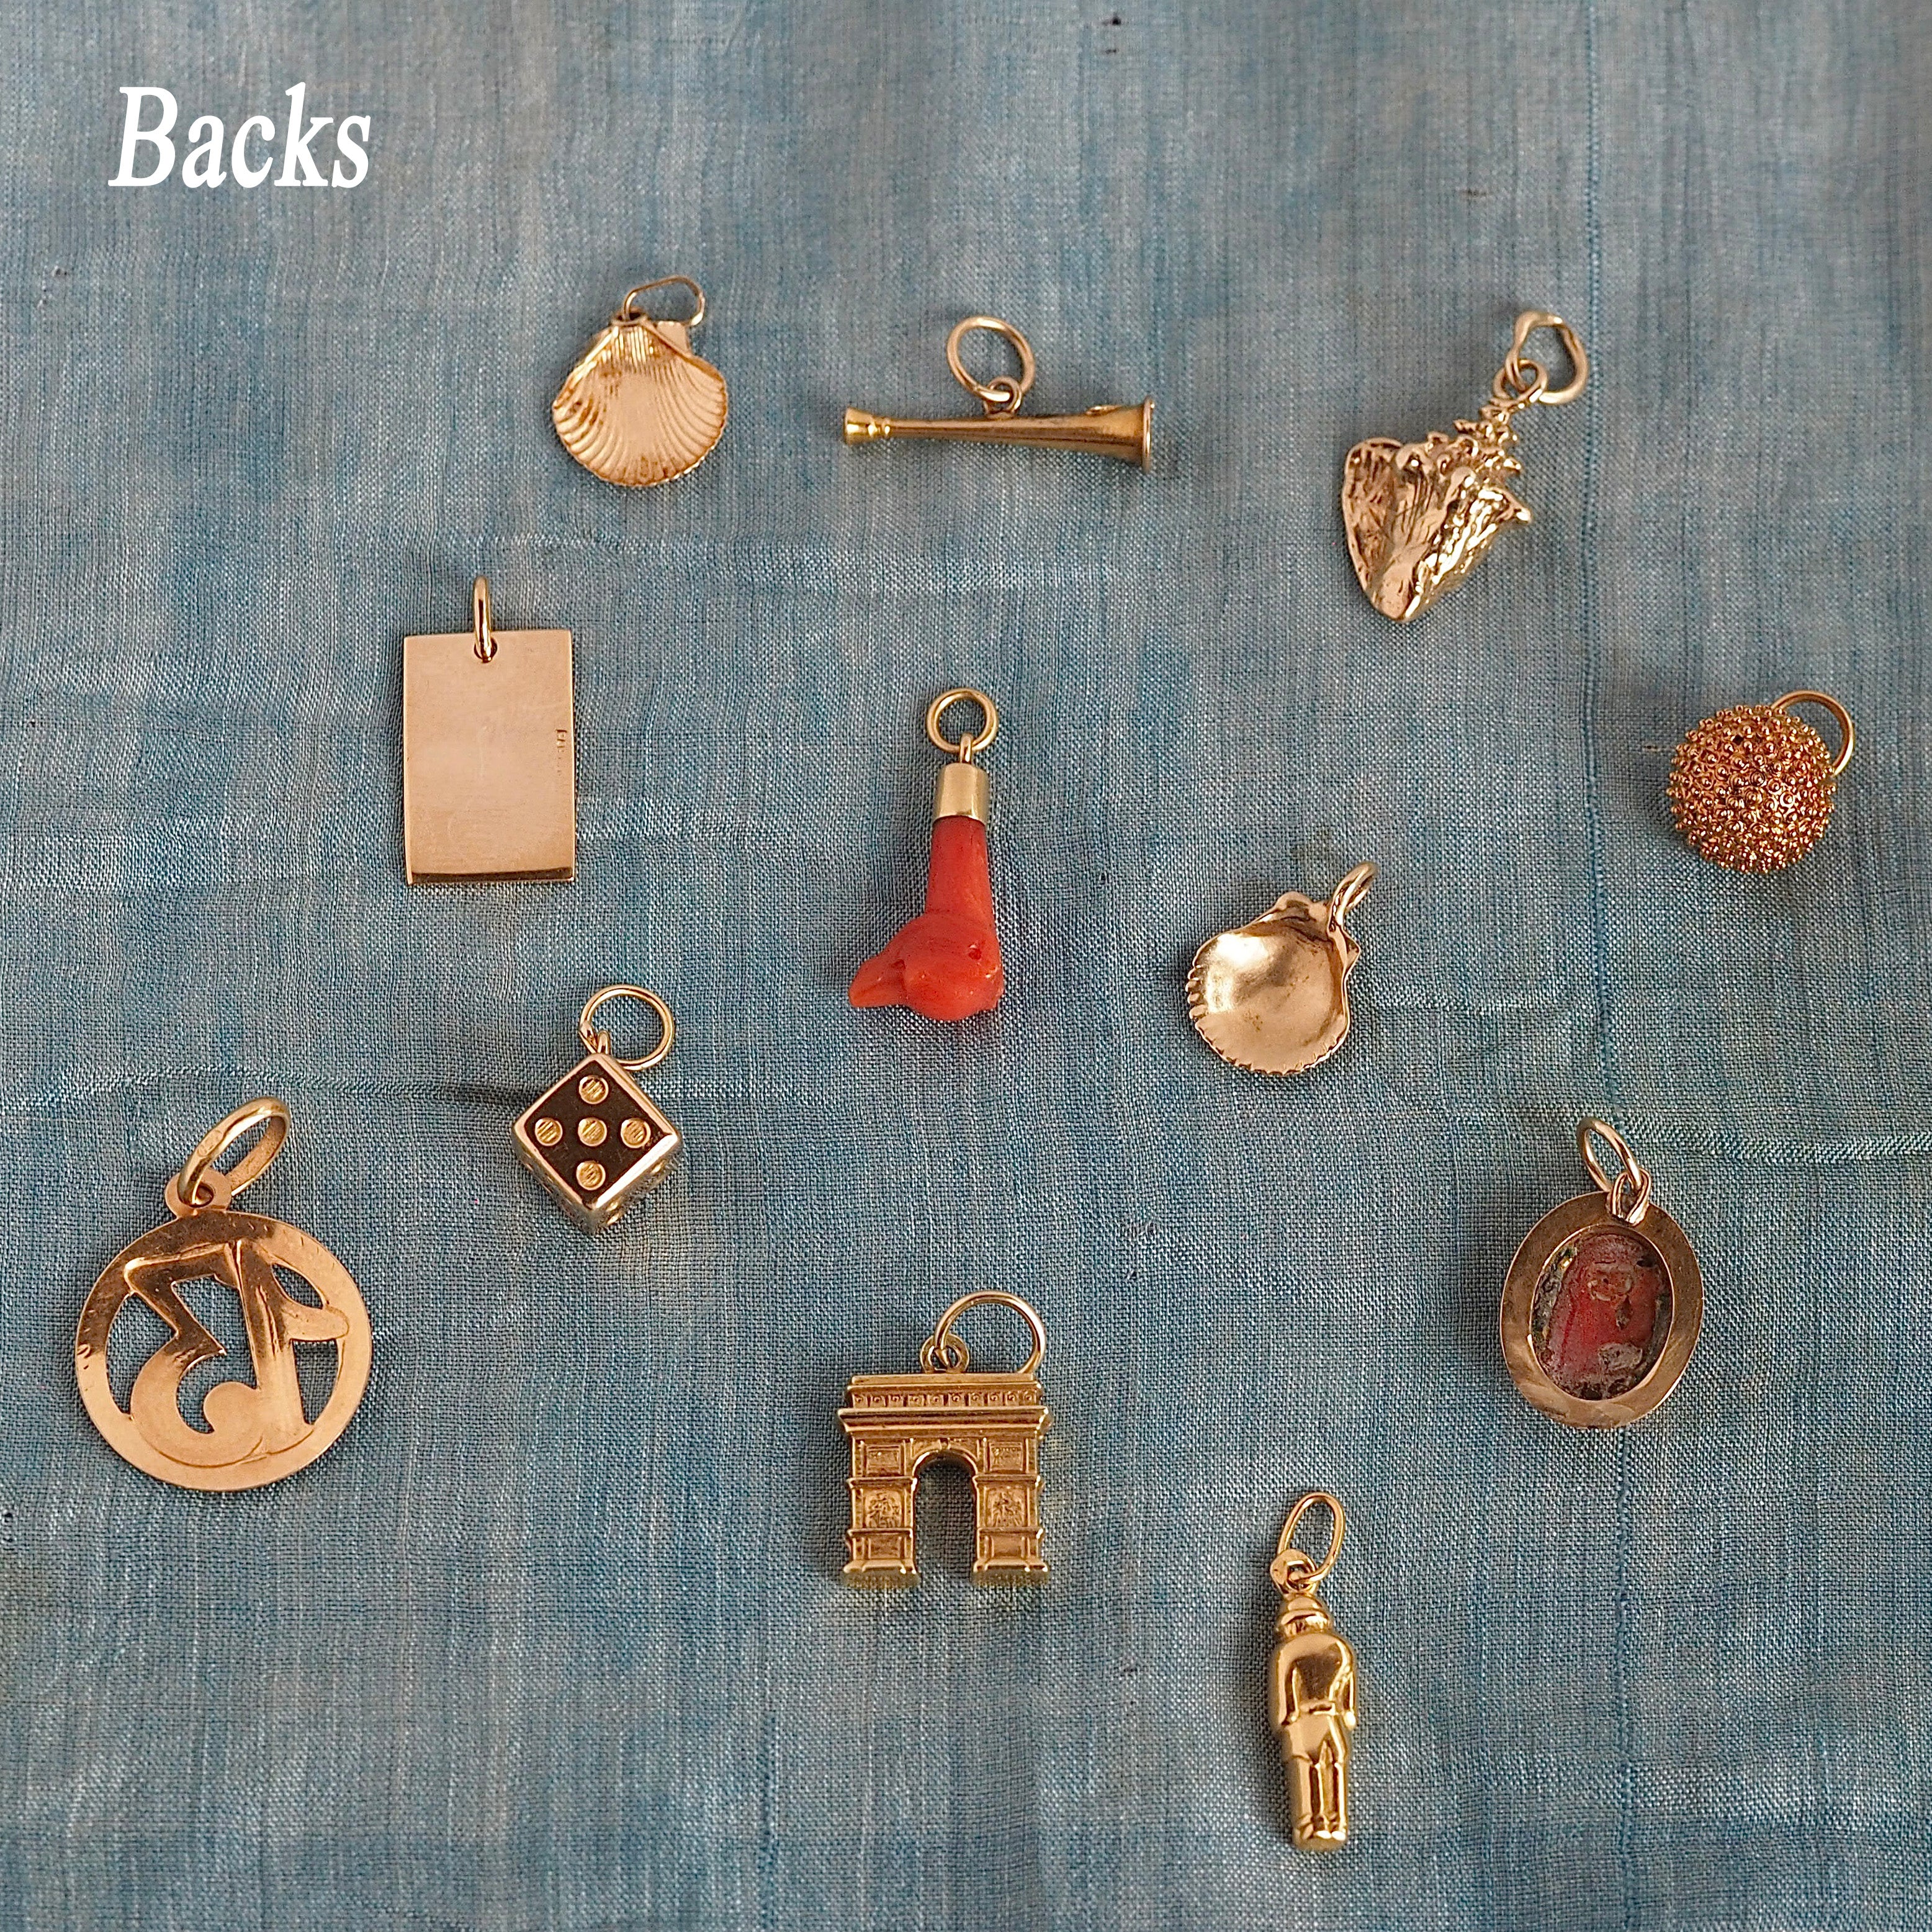 Antique and Vintage Gold Charms